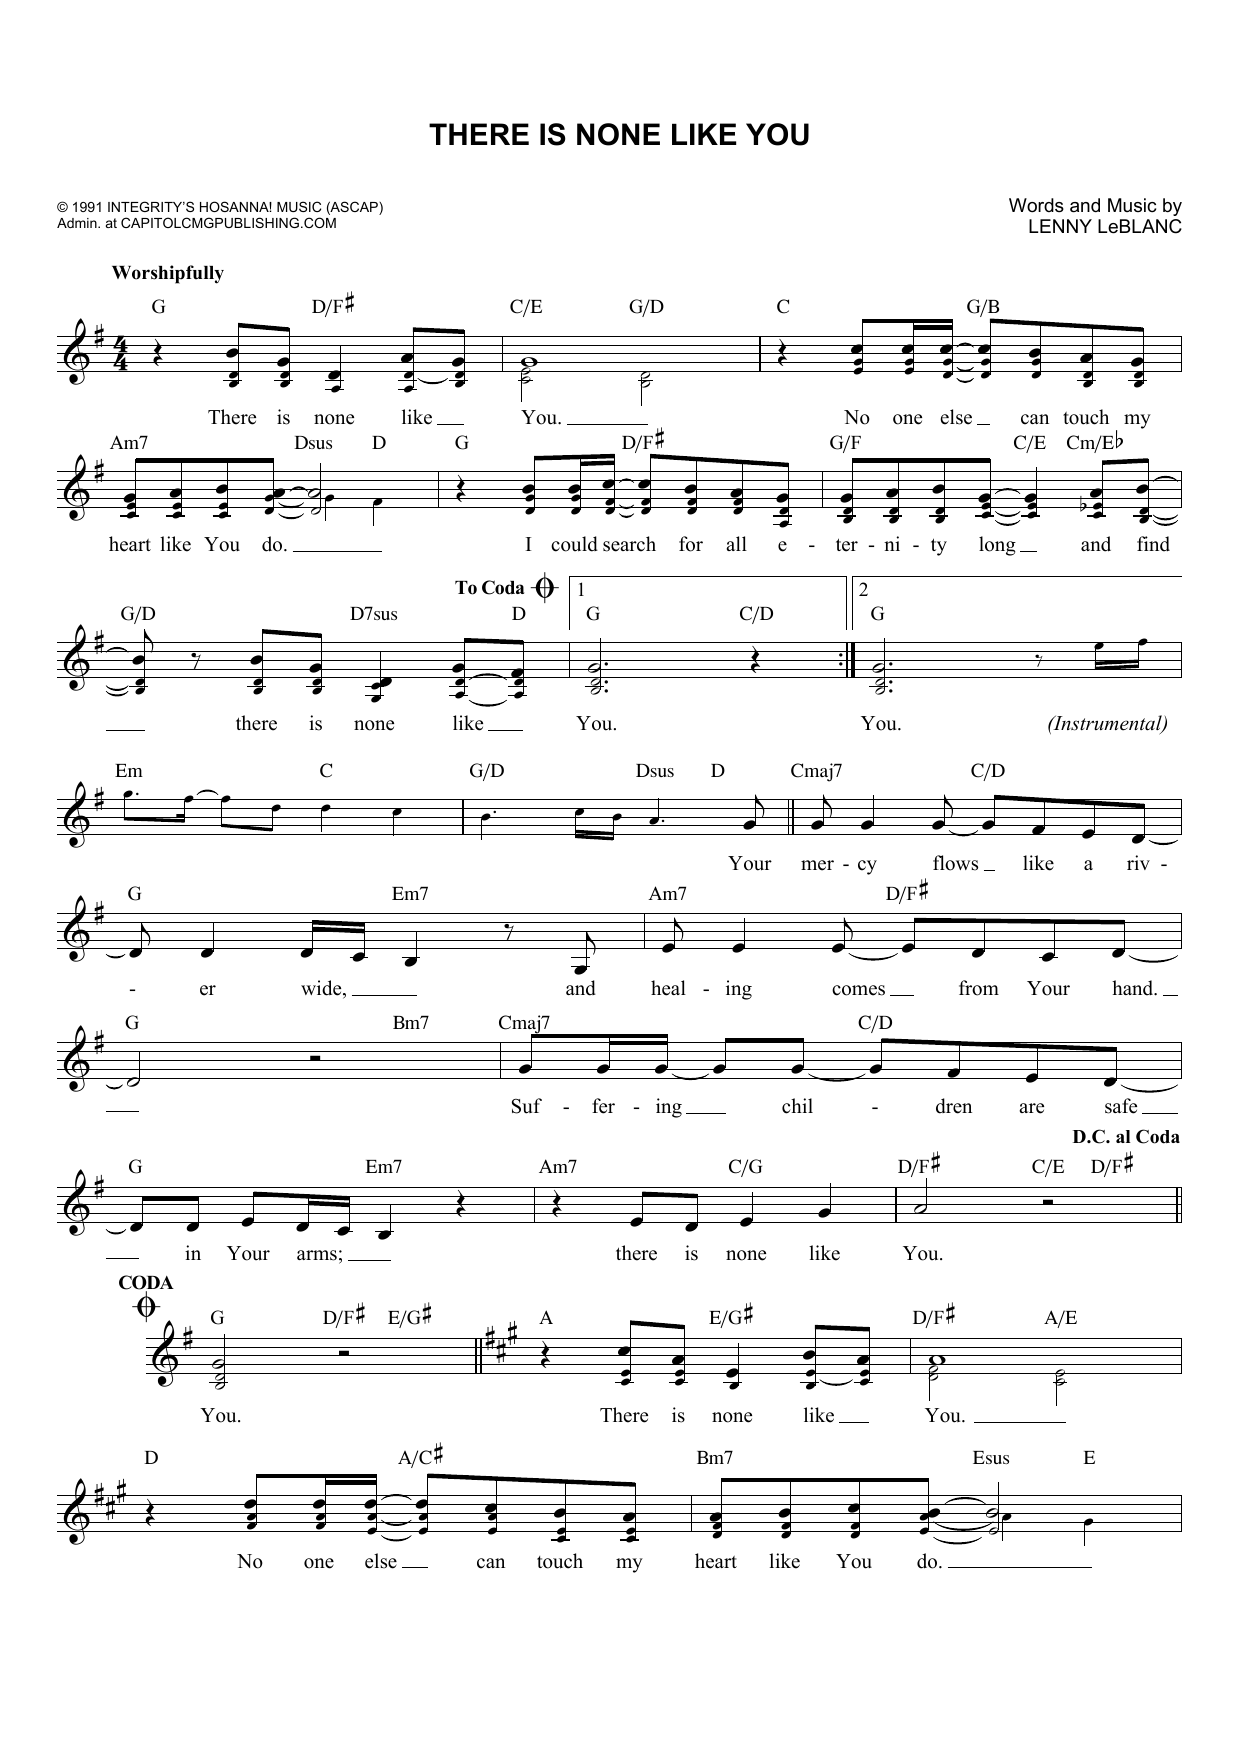 Download Lenny LeBlanc There Is None Like You Sheet Music